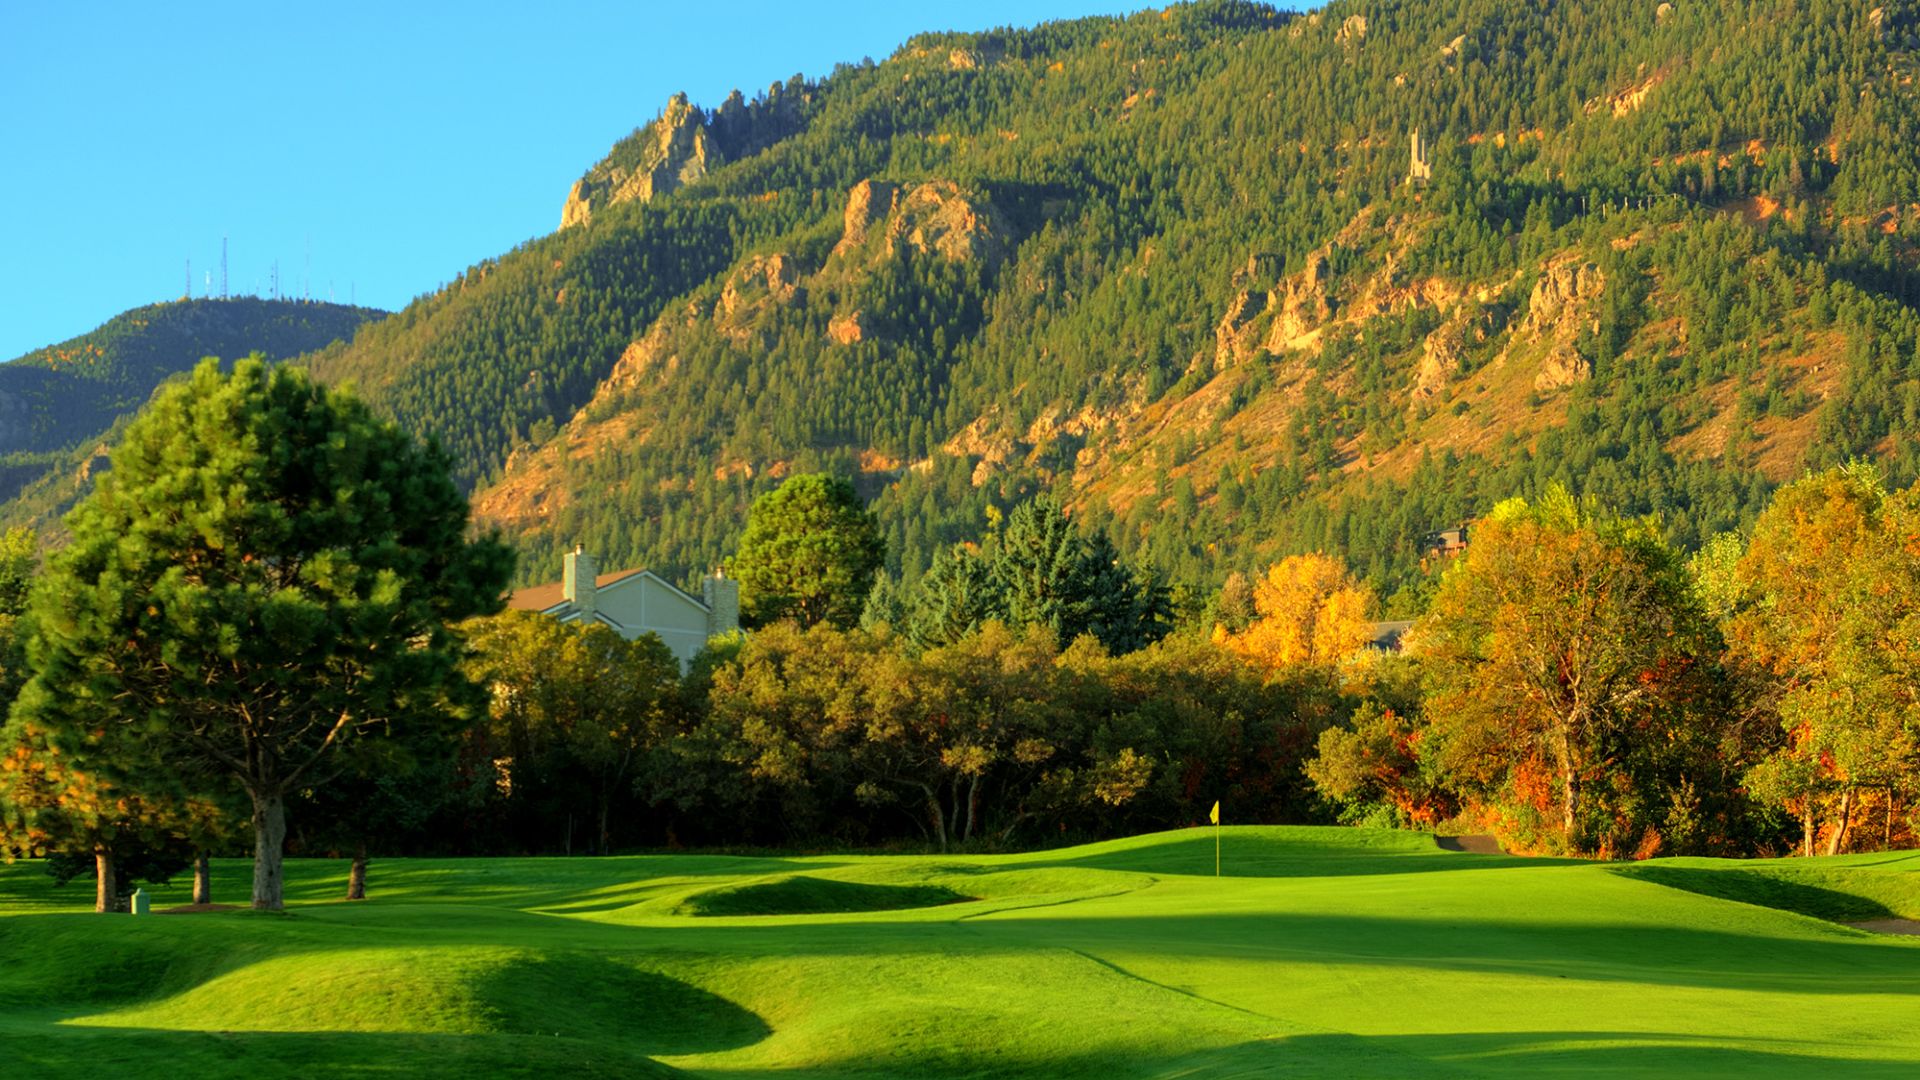 Part of The Broadmoor resort in Colorado Springs, this historic golfing venue offers two championship courses with a rich USGA championship history (source: The Broadmoor).